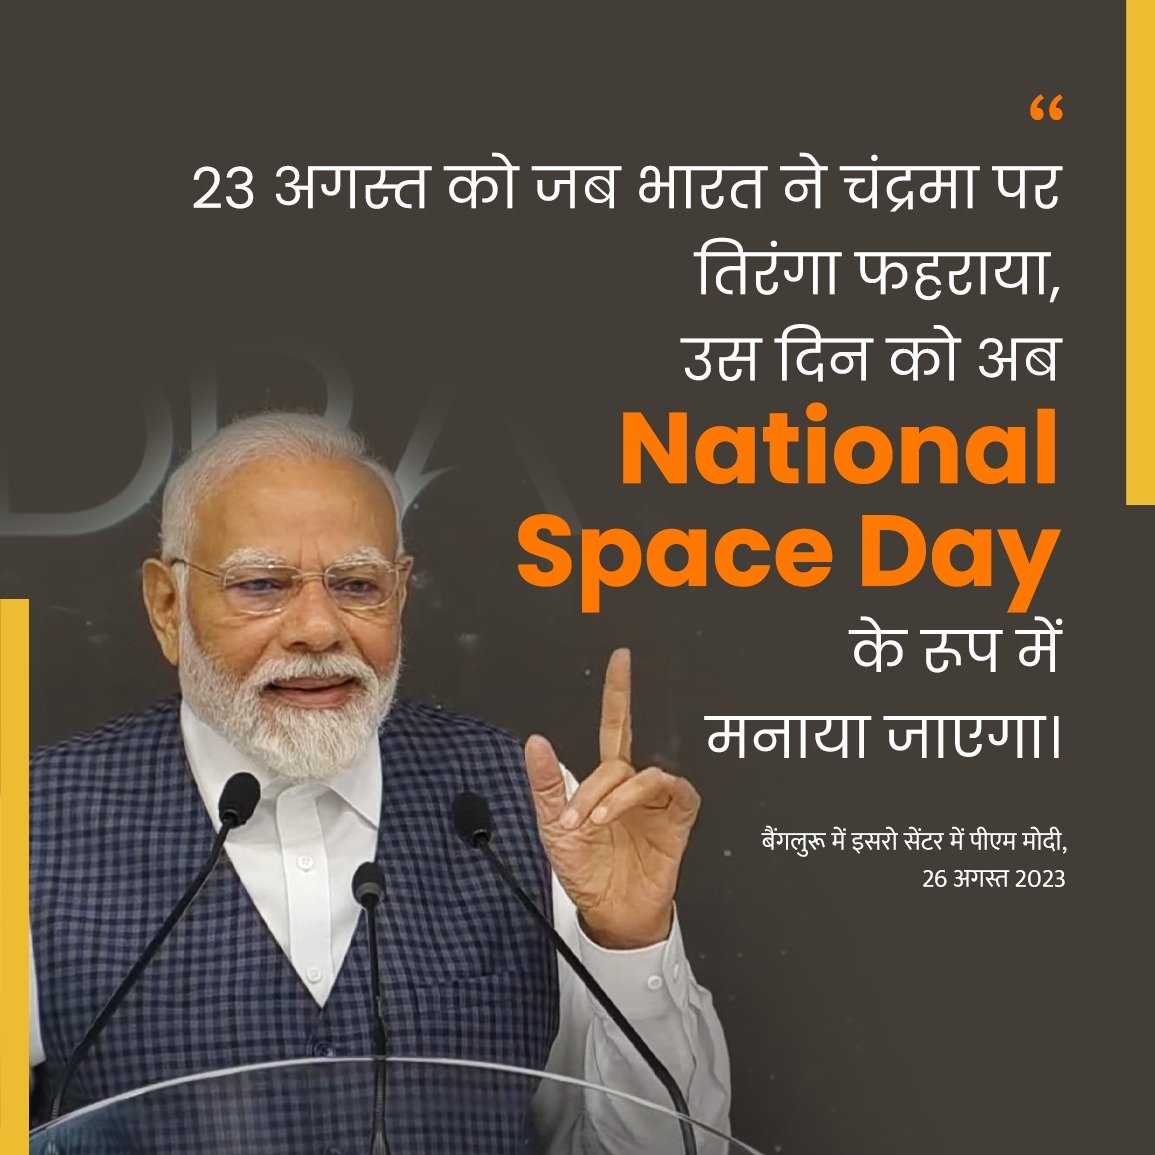 The touchdown point of Chandrayaan 3 is ShivShakti |  23rd August will be celebrated as the National Space Day